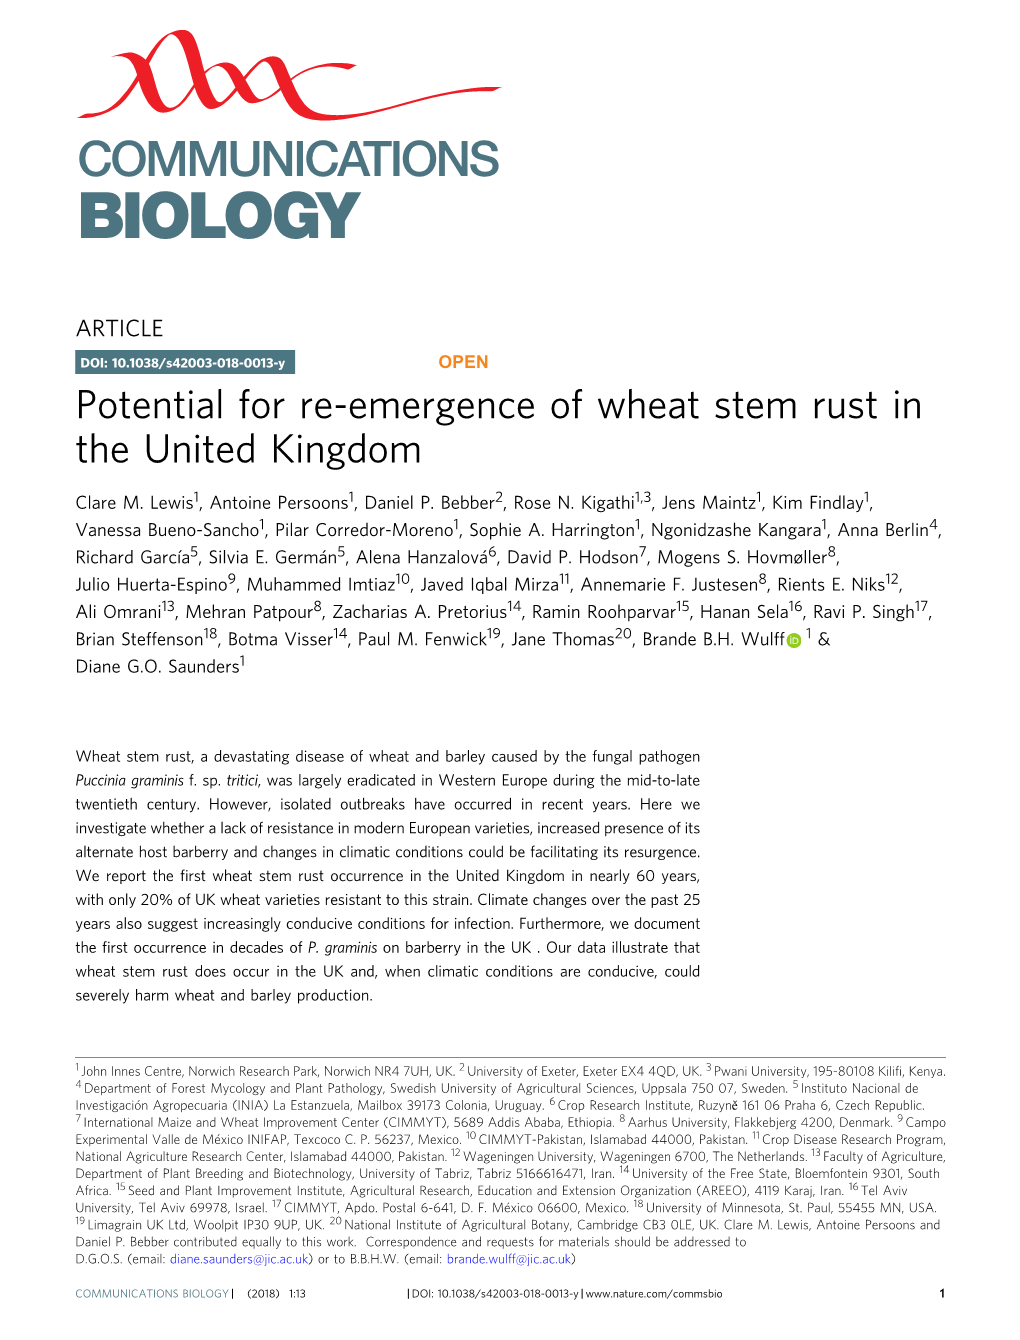 Potential for Re-Emergence of Wheat Stem Rust in the United Kingdom